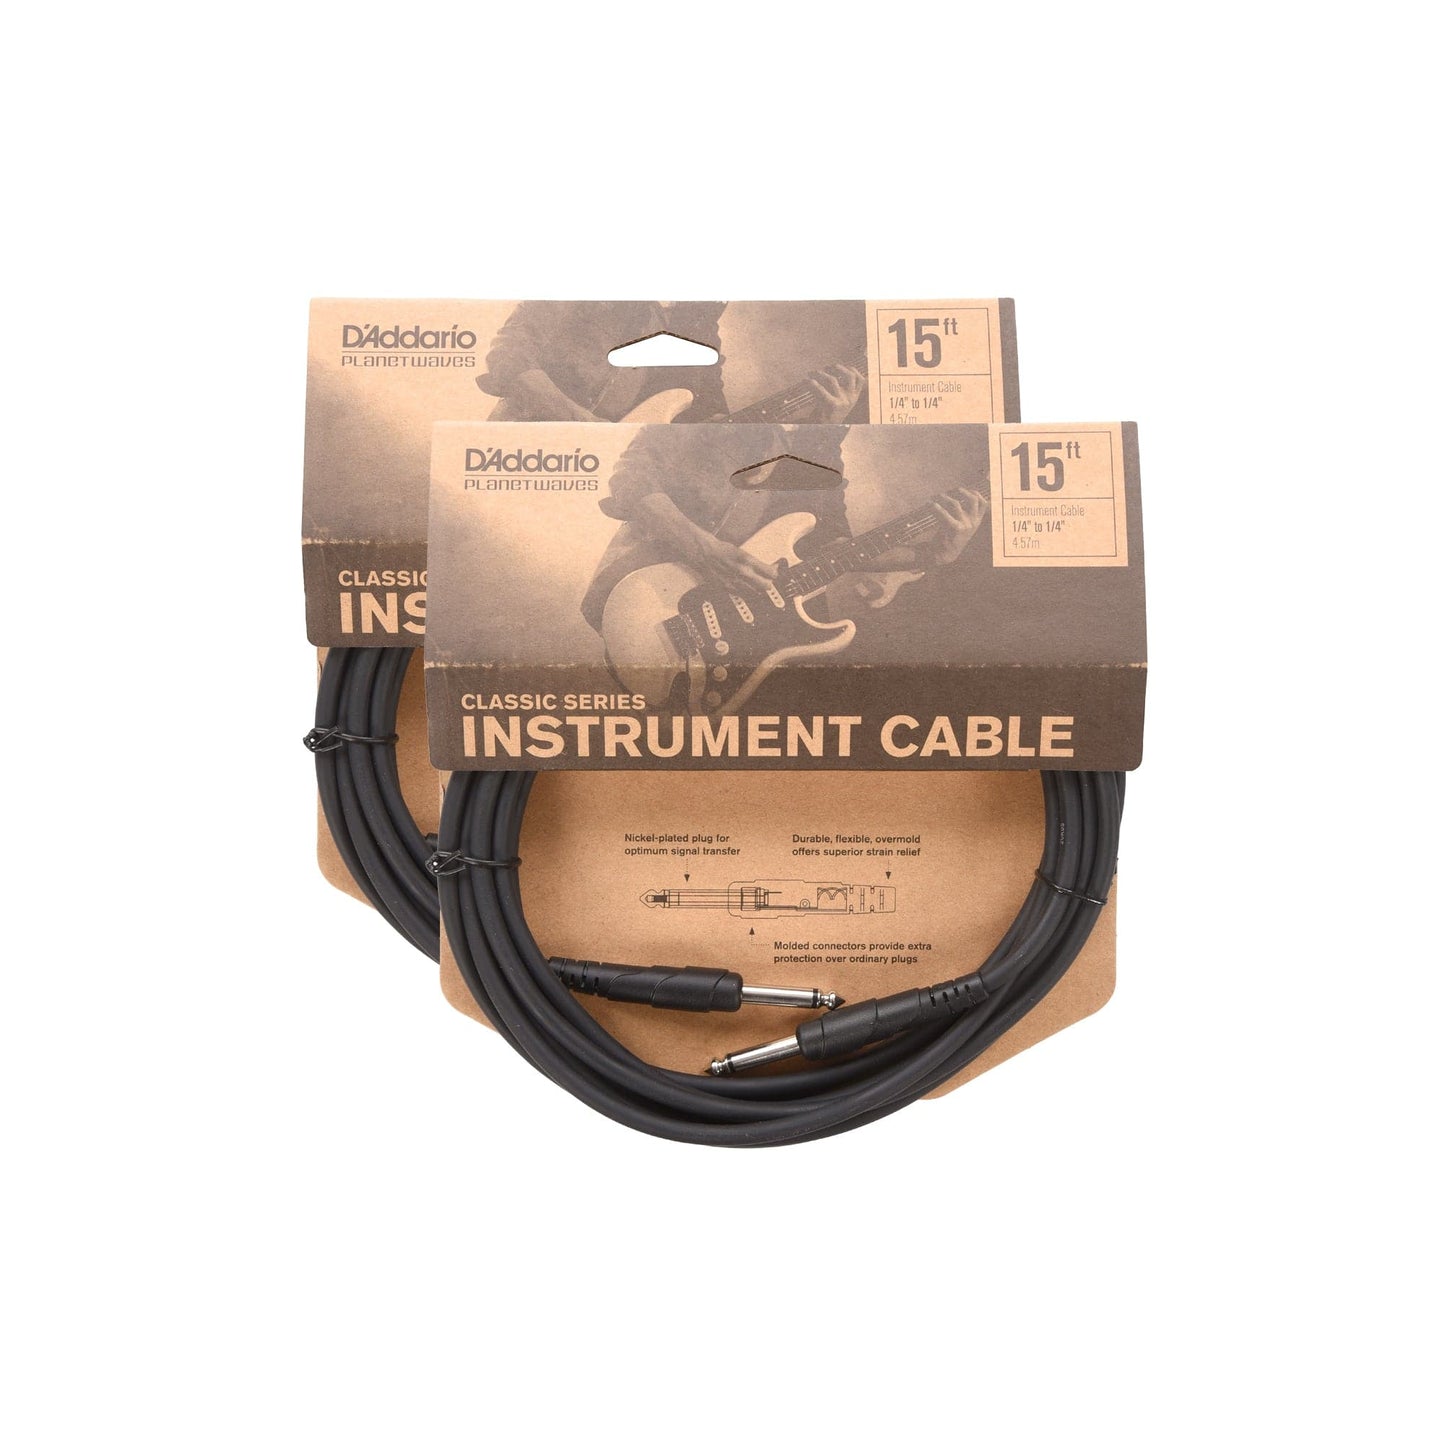 D'Addario Classic Instrument Cable 15' Straight-Straight 2 Pack Bundle Accessories / Cables